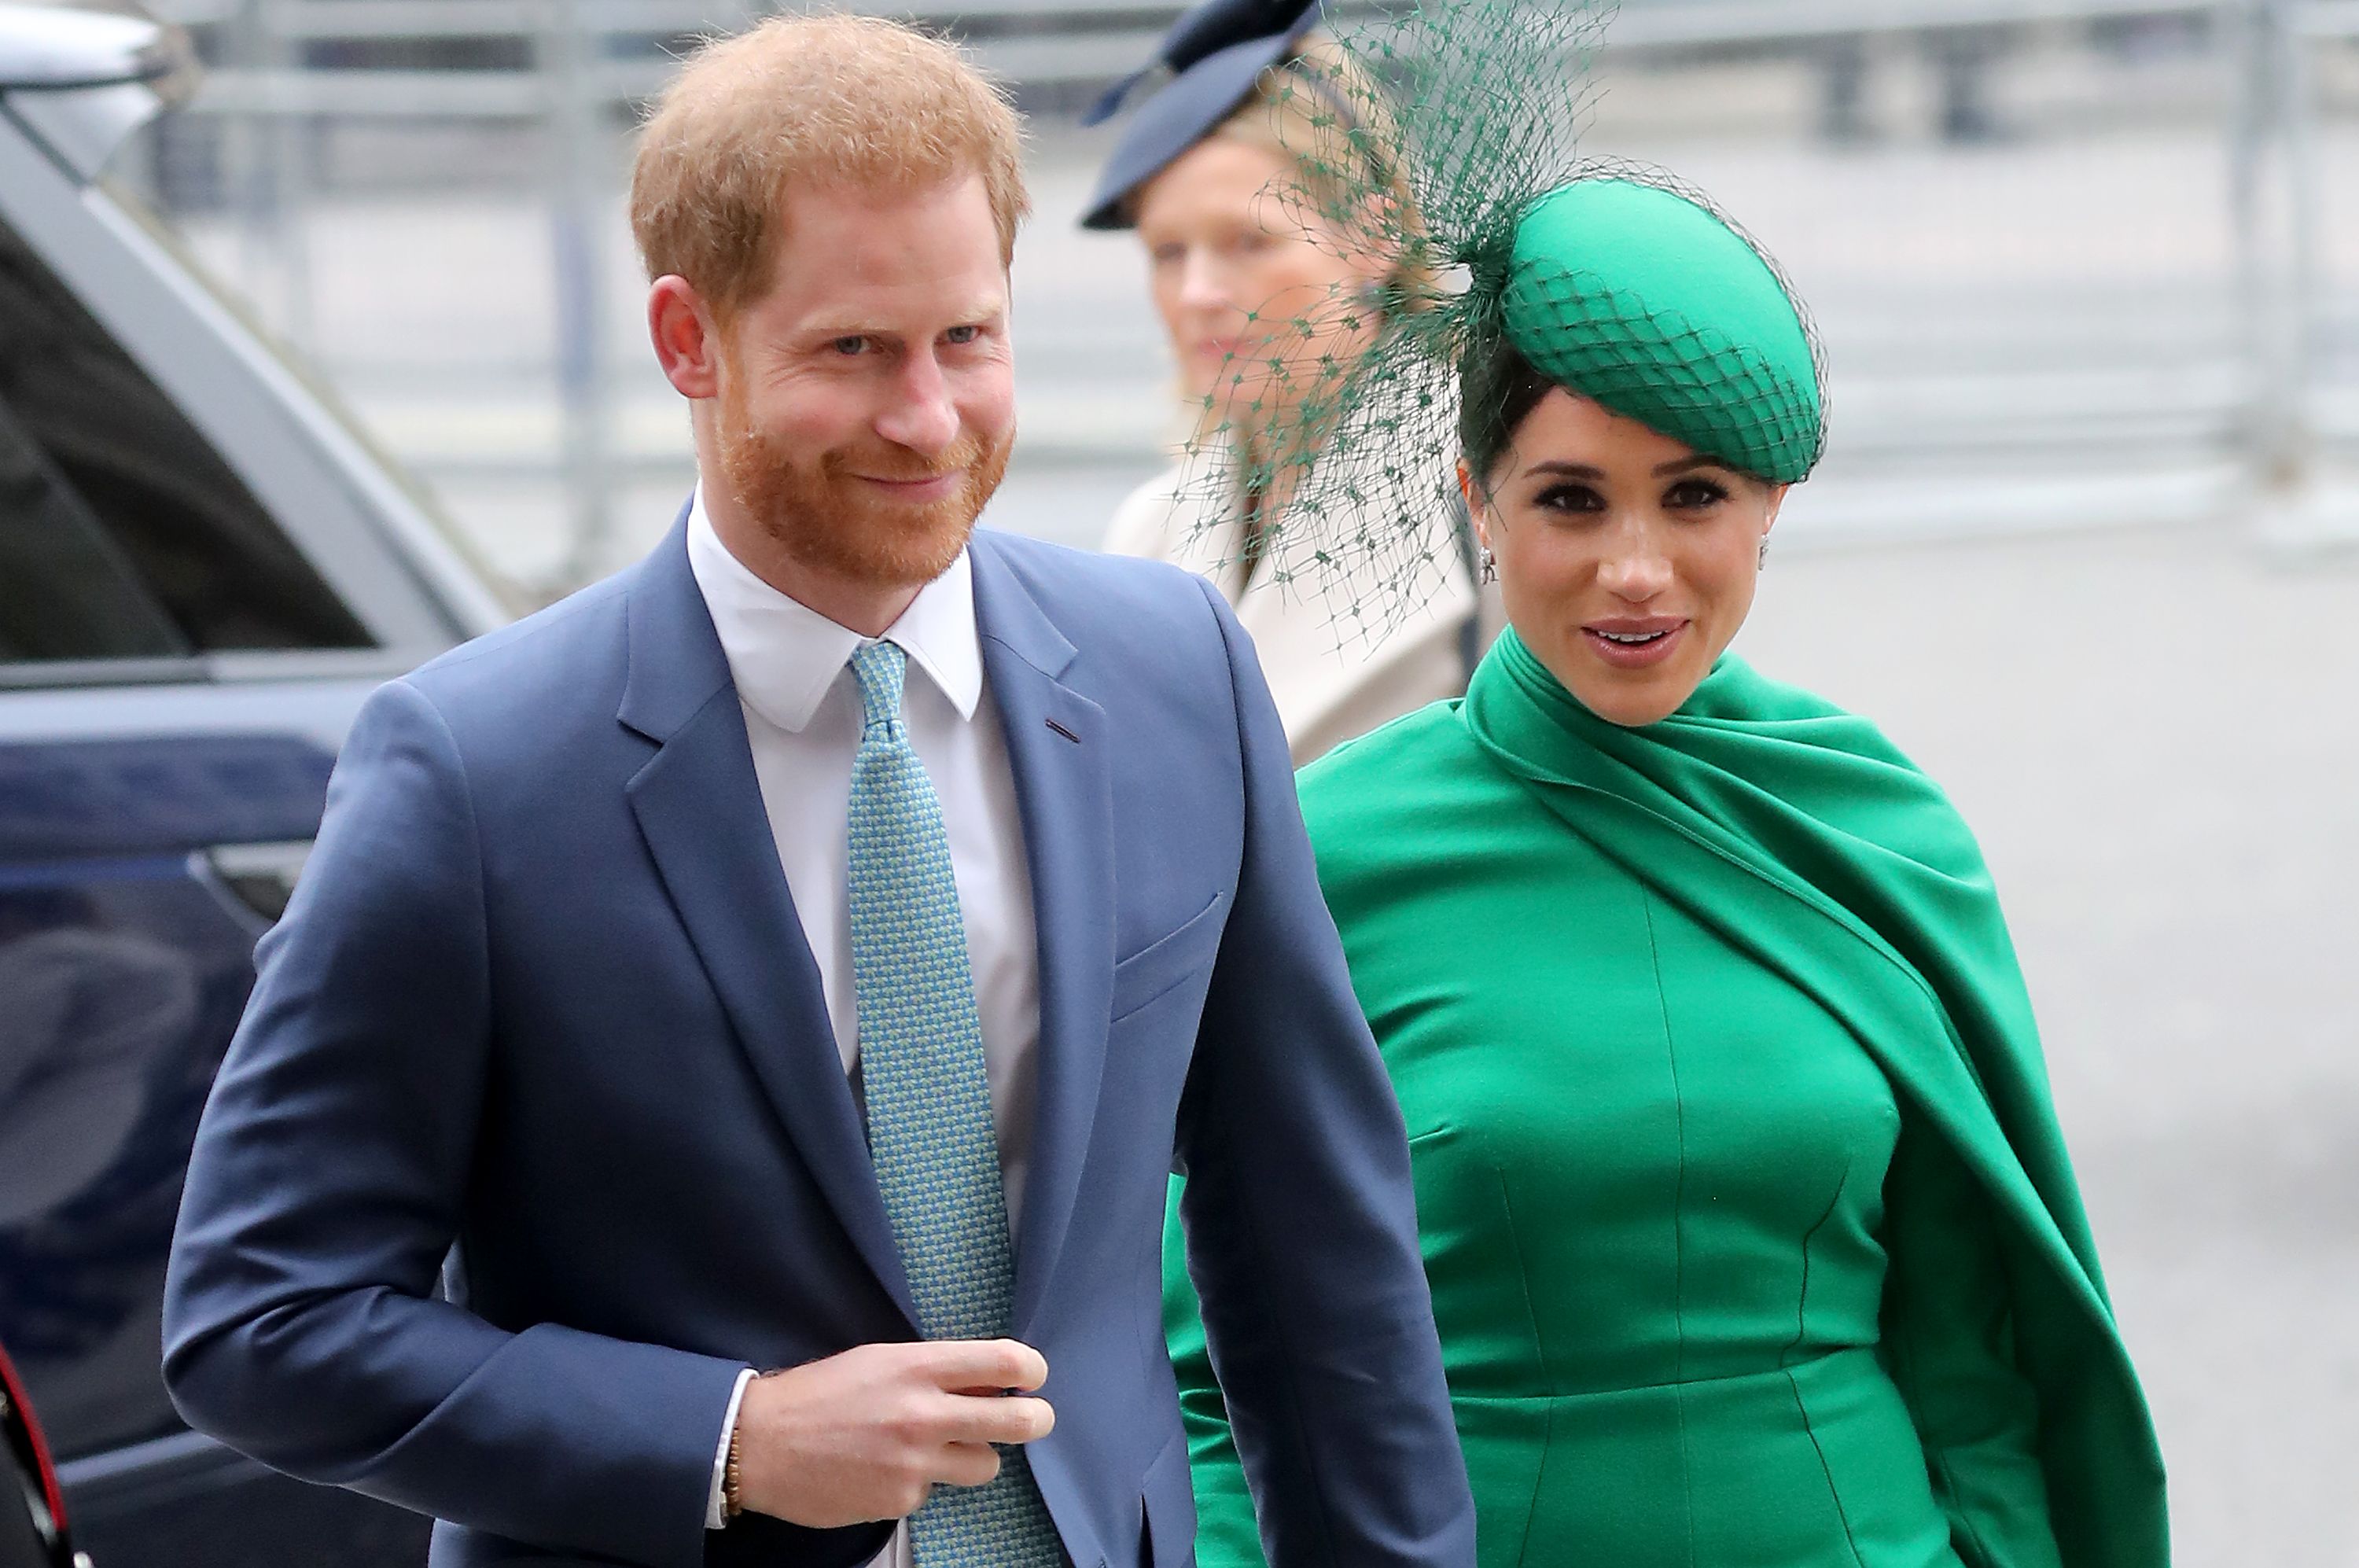 Prince Harry and Meghan Markle appear at an event.